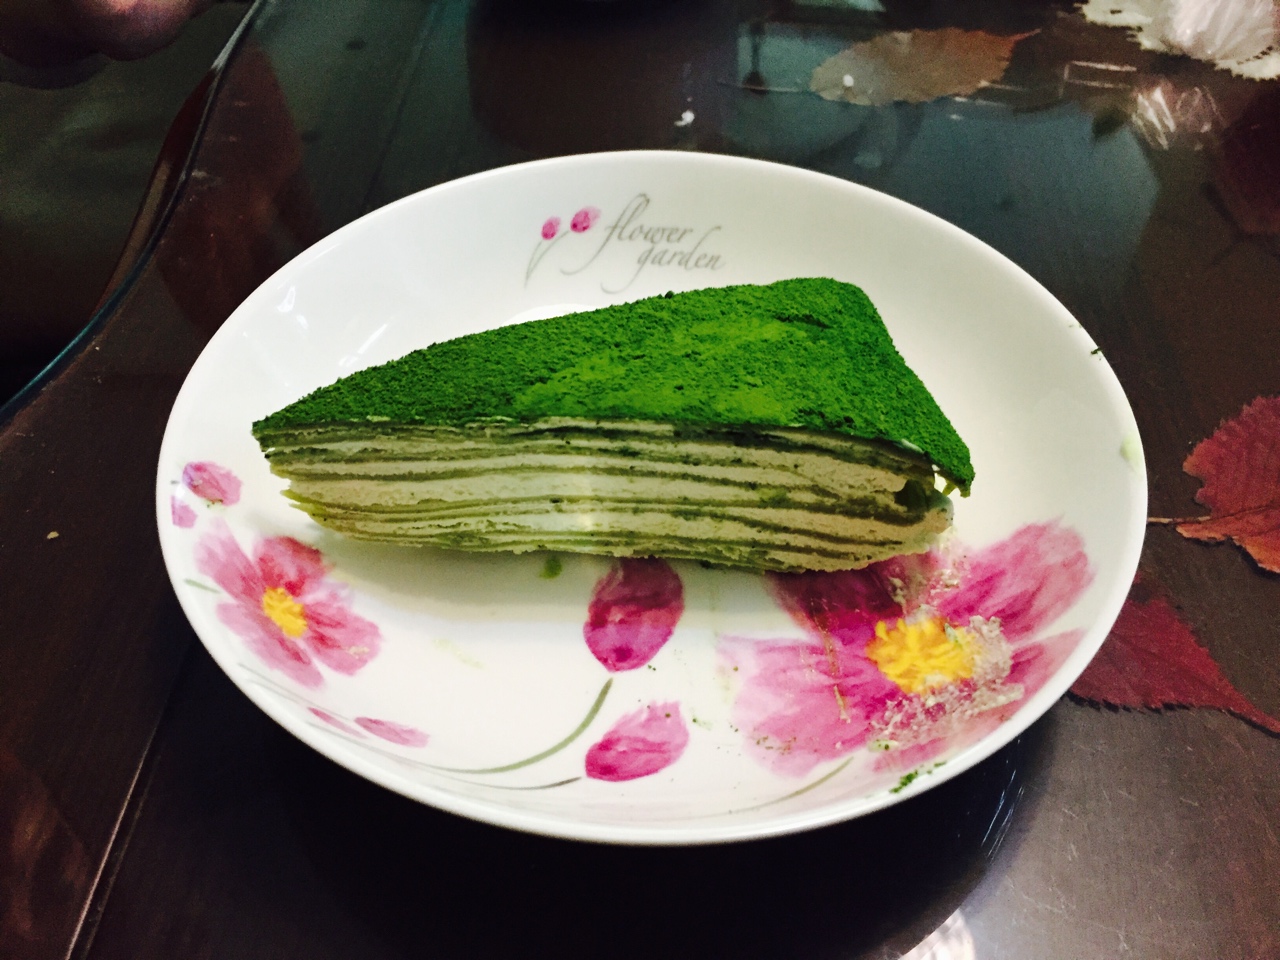 LADY M 抹茶千层可丽饼/千层蛋糕 Green Tea Mille Crepes